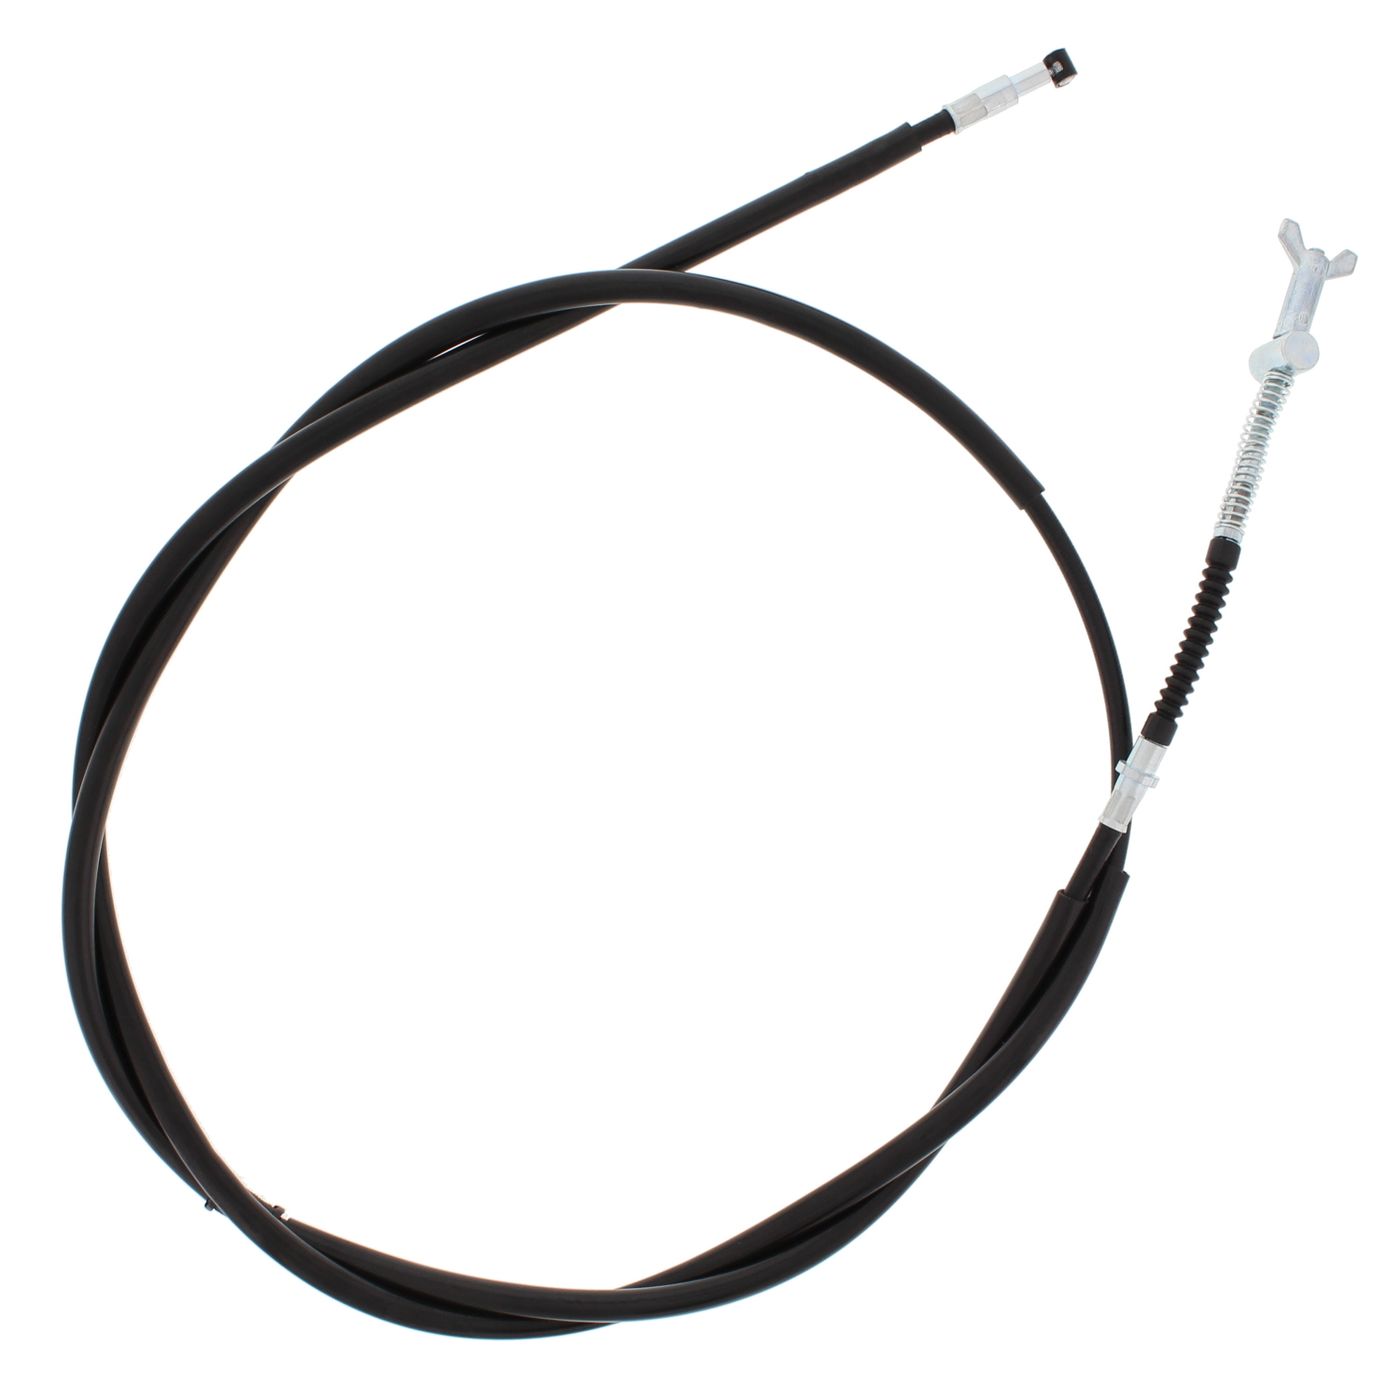 Wrp Brake Cables - WRP454019 image